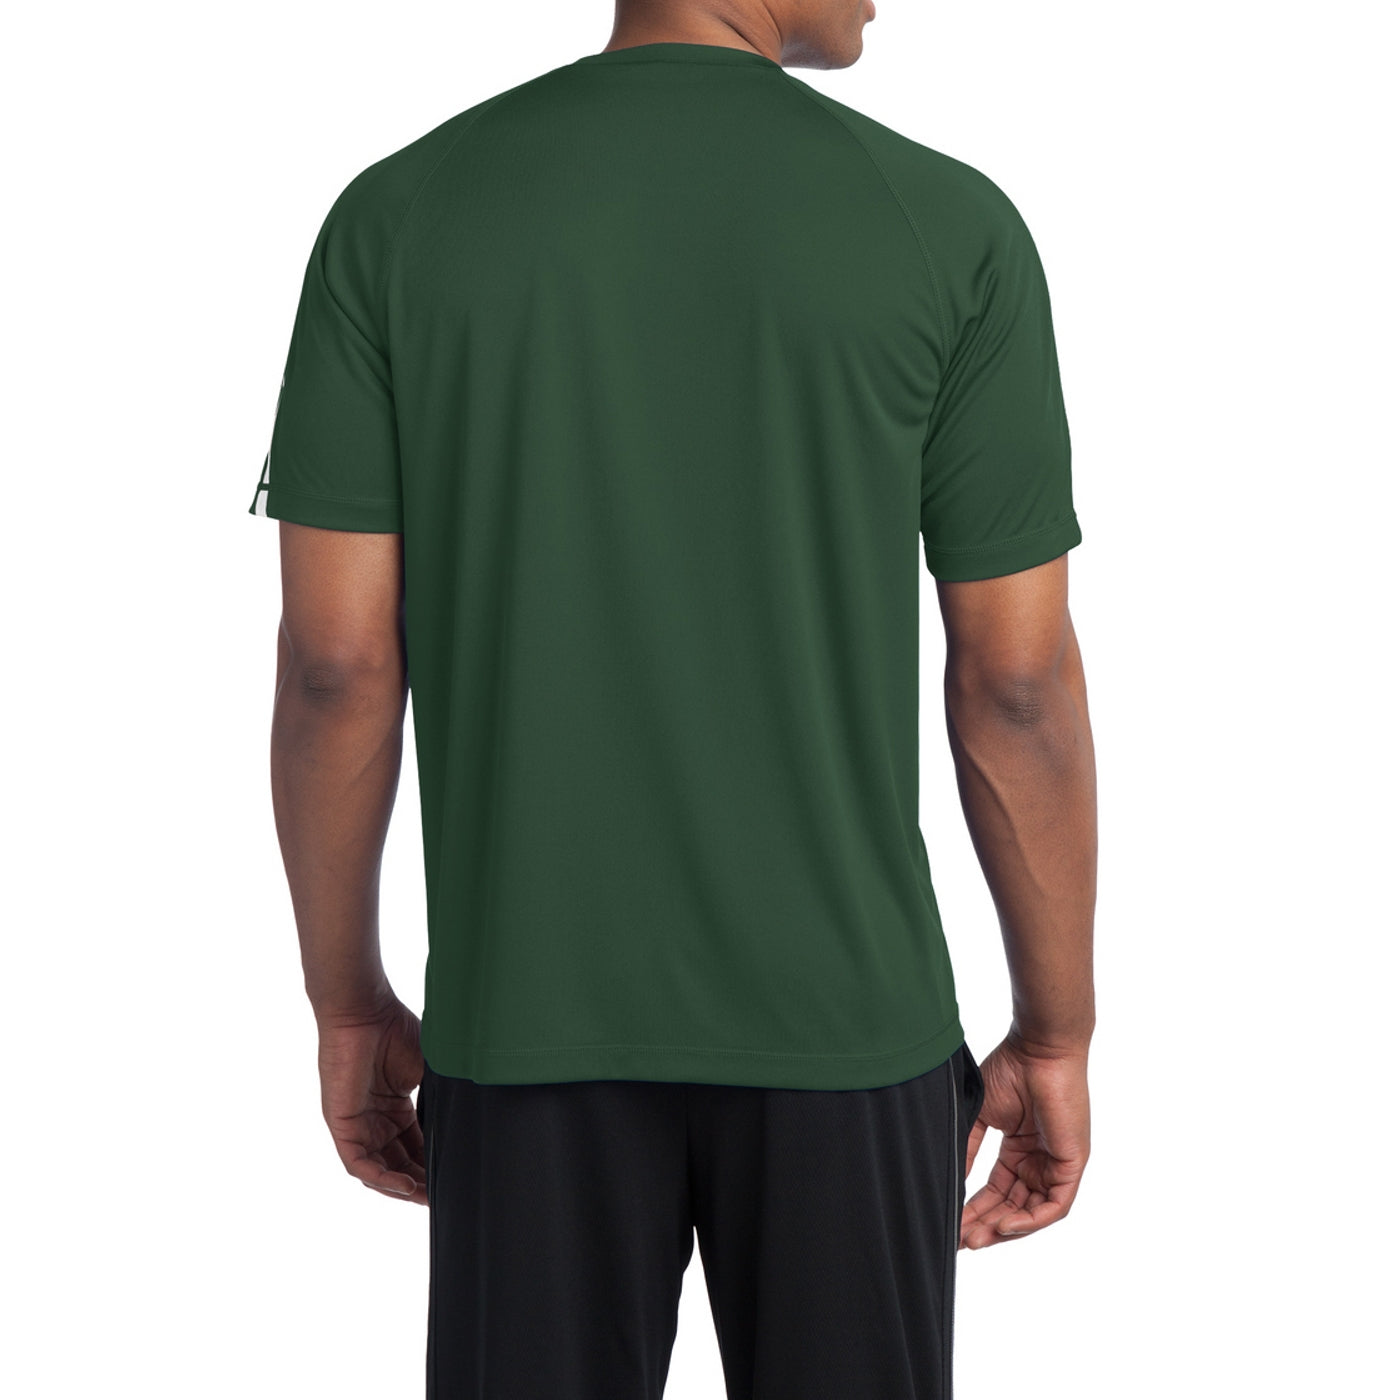 Men's Colorblock PosiCharge Competitor Tee - Forest Green/ White